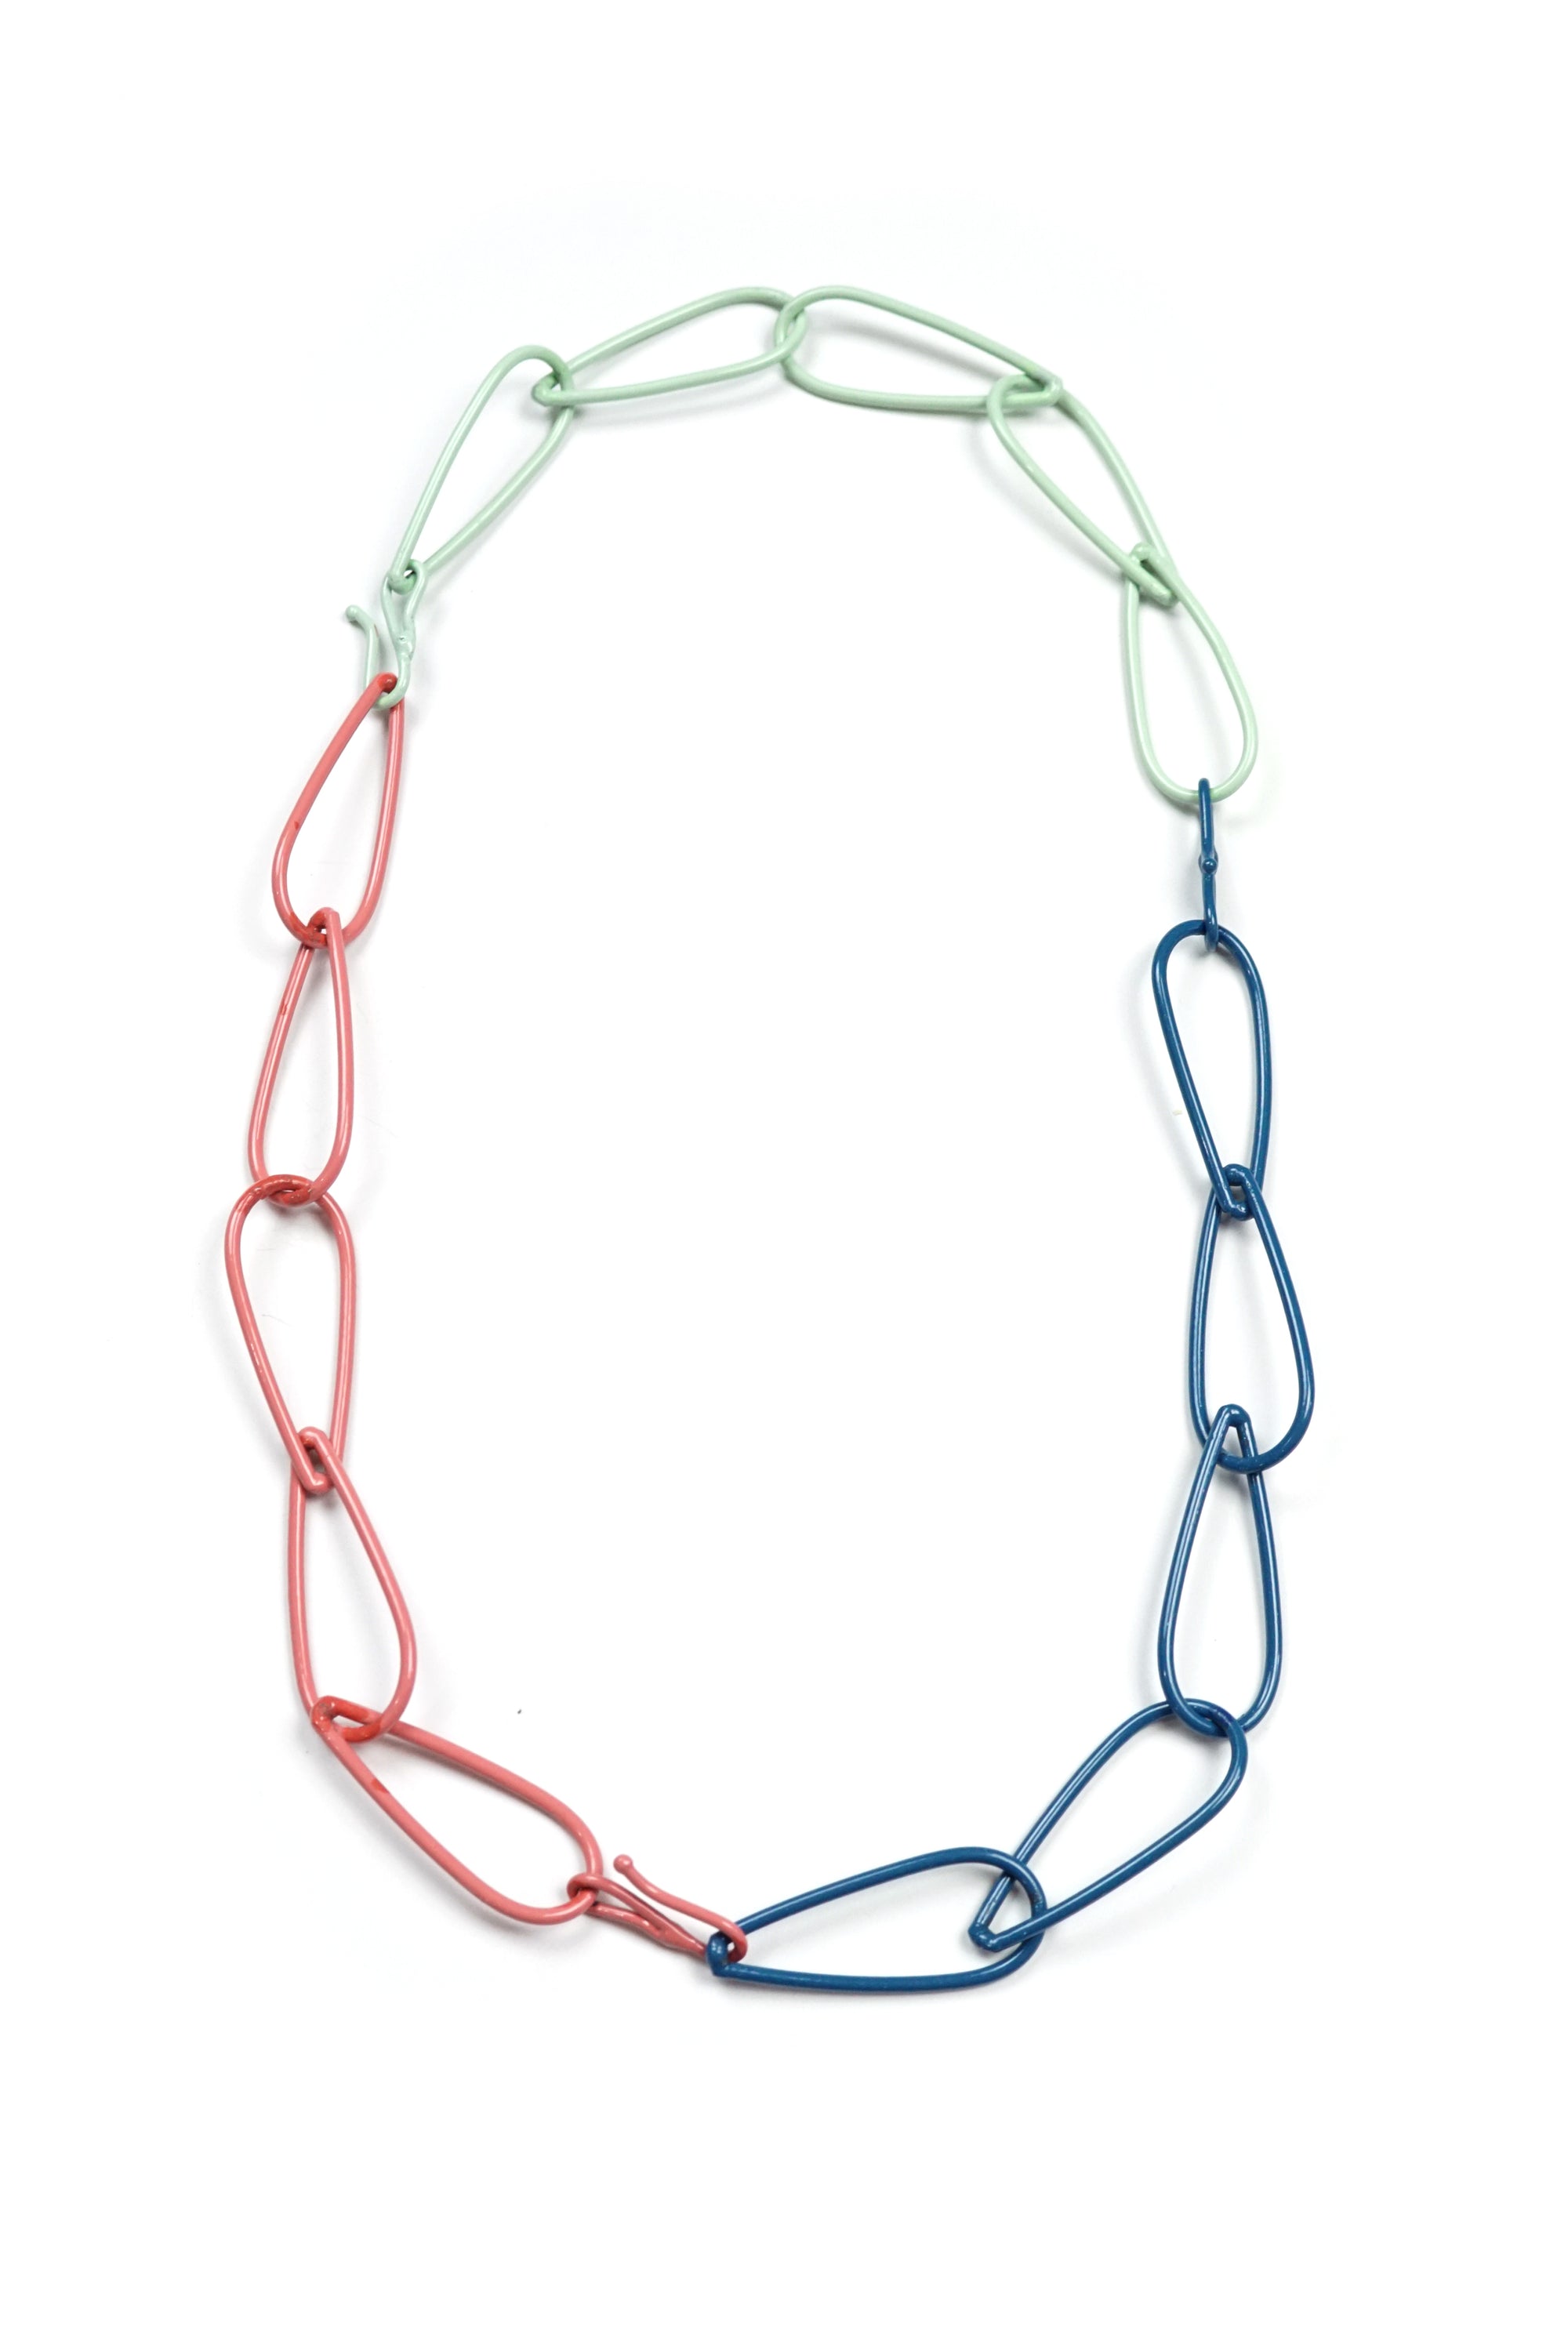 Modular Necklace in Azure Blue, Light Raspberry, and Soft Mint